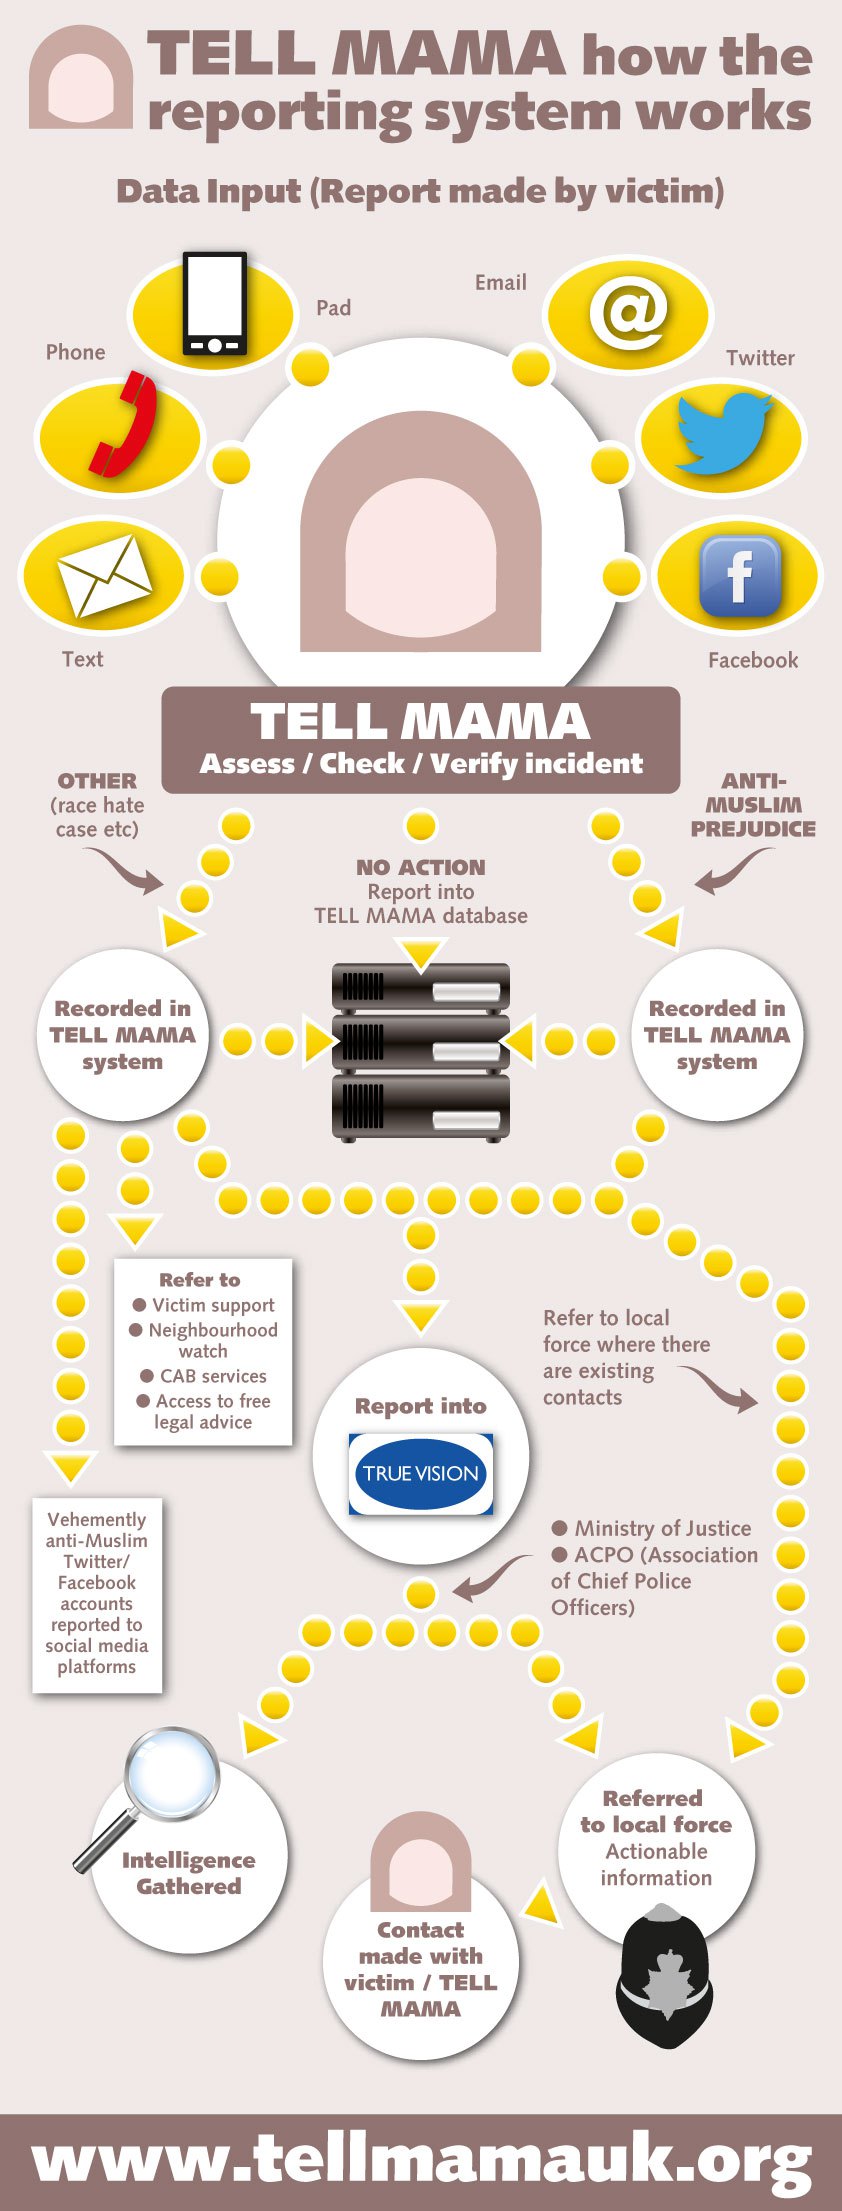 Tell MAMA – How the reporting system works